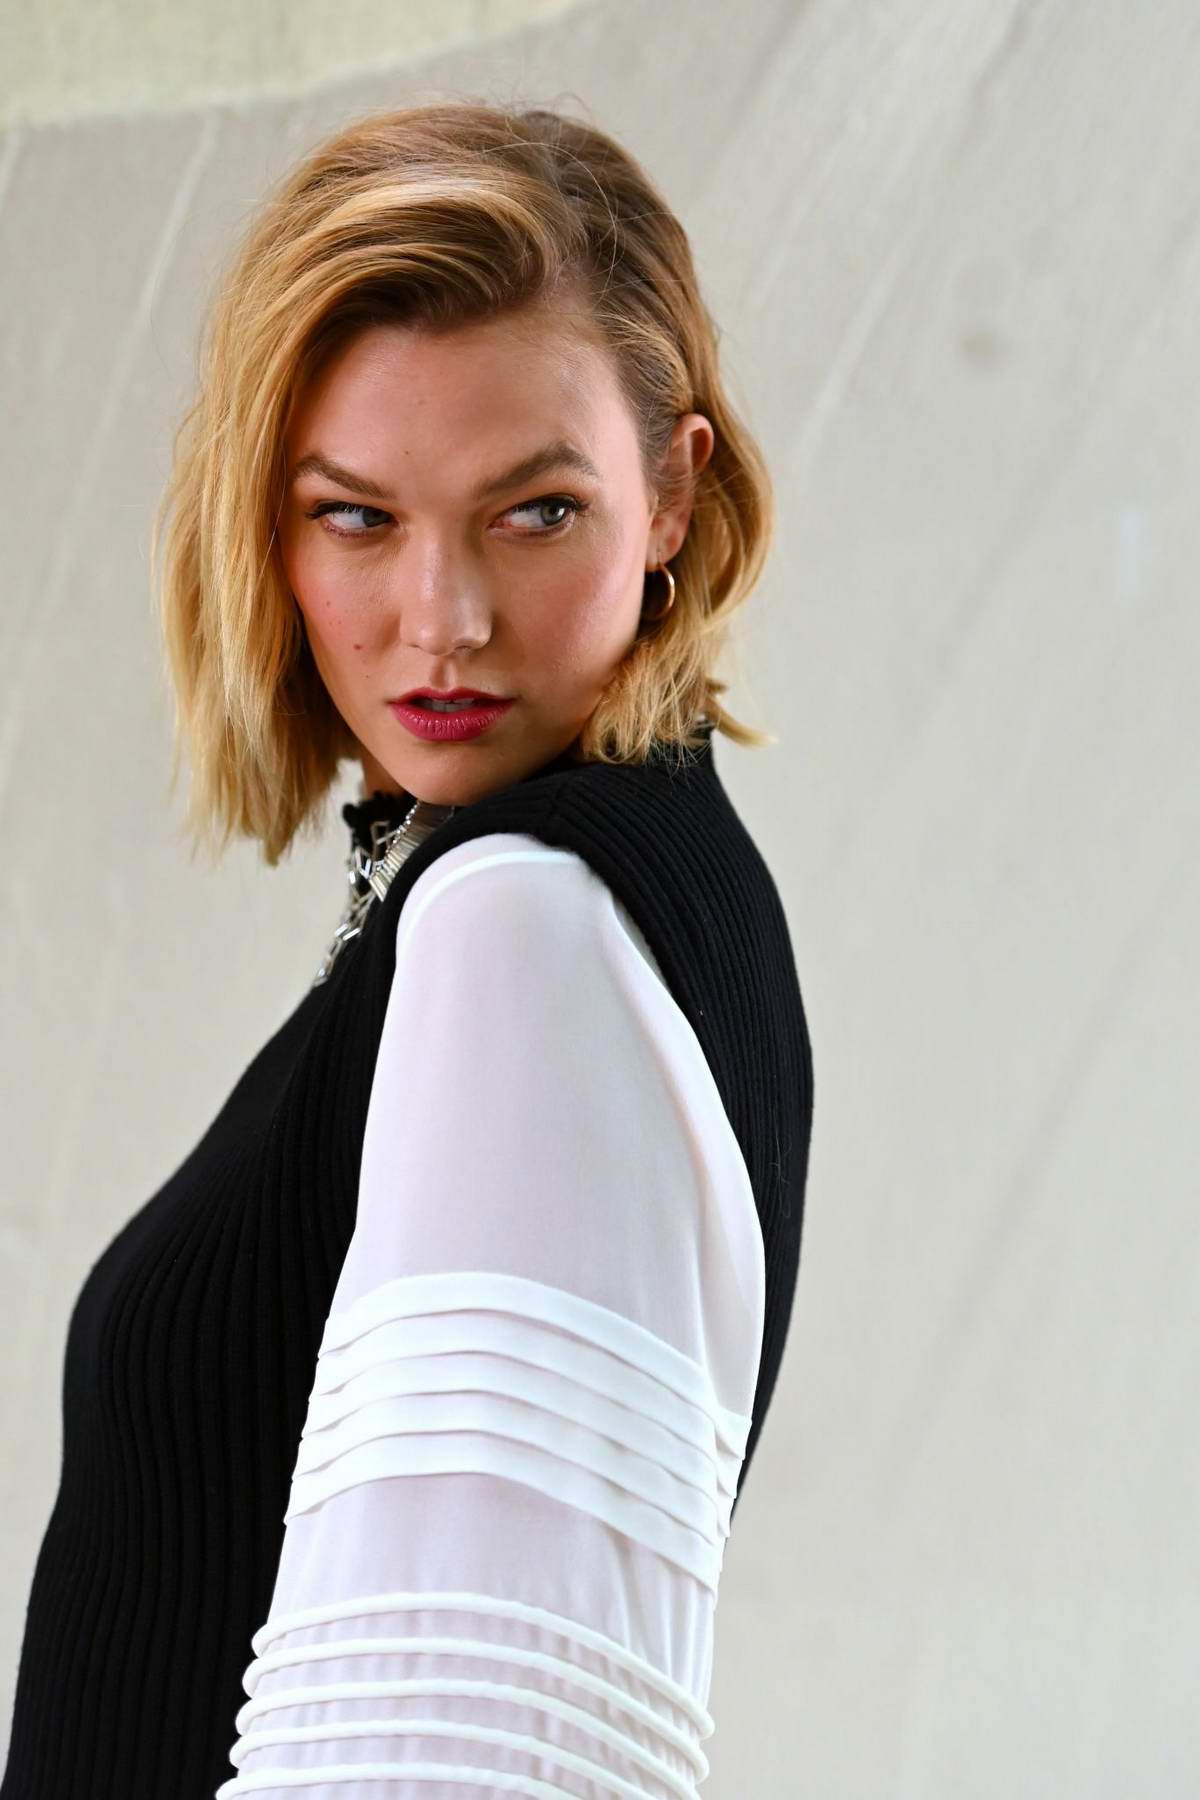 karlie kloss attends louis vuitton cruise 2020 fashion show at jfk airport in new york city-080519_3